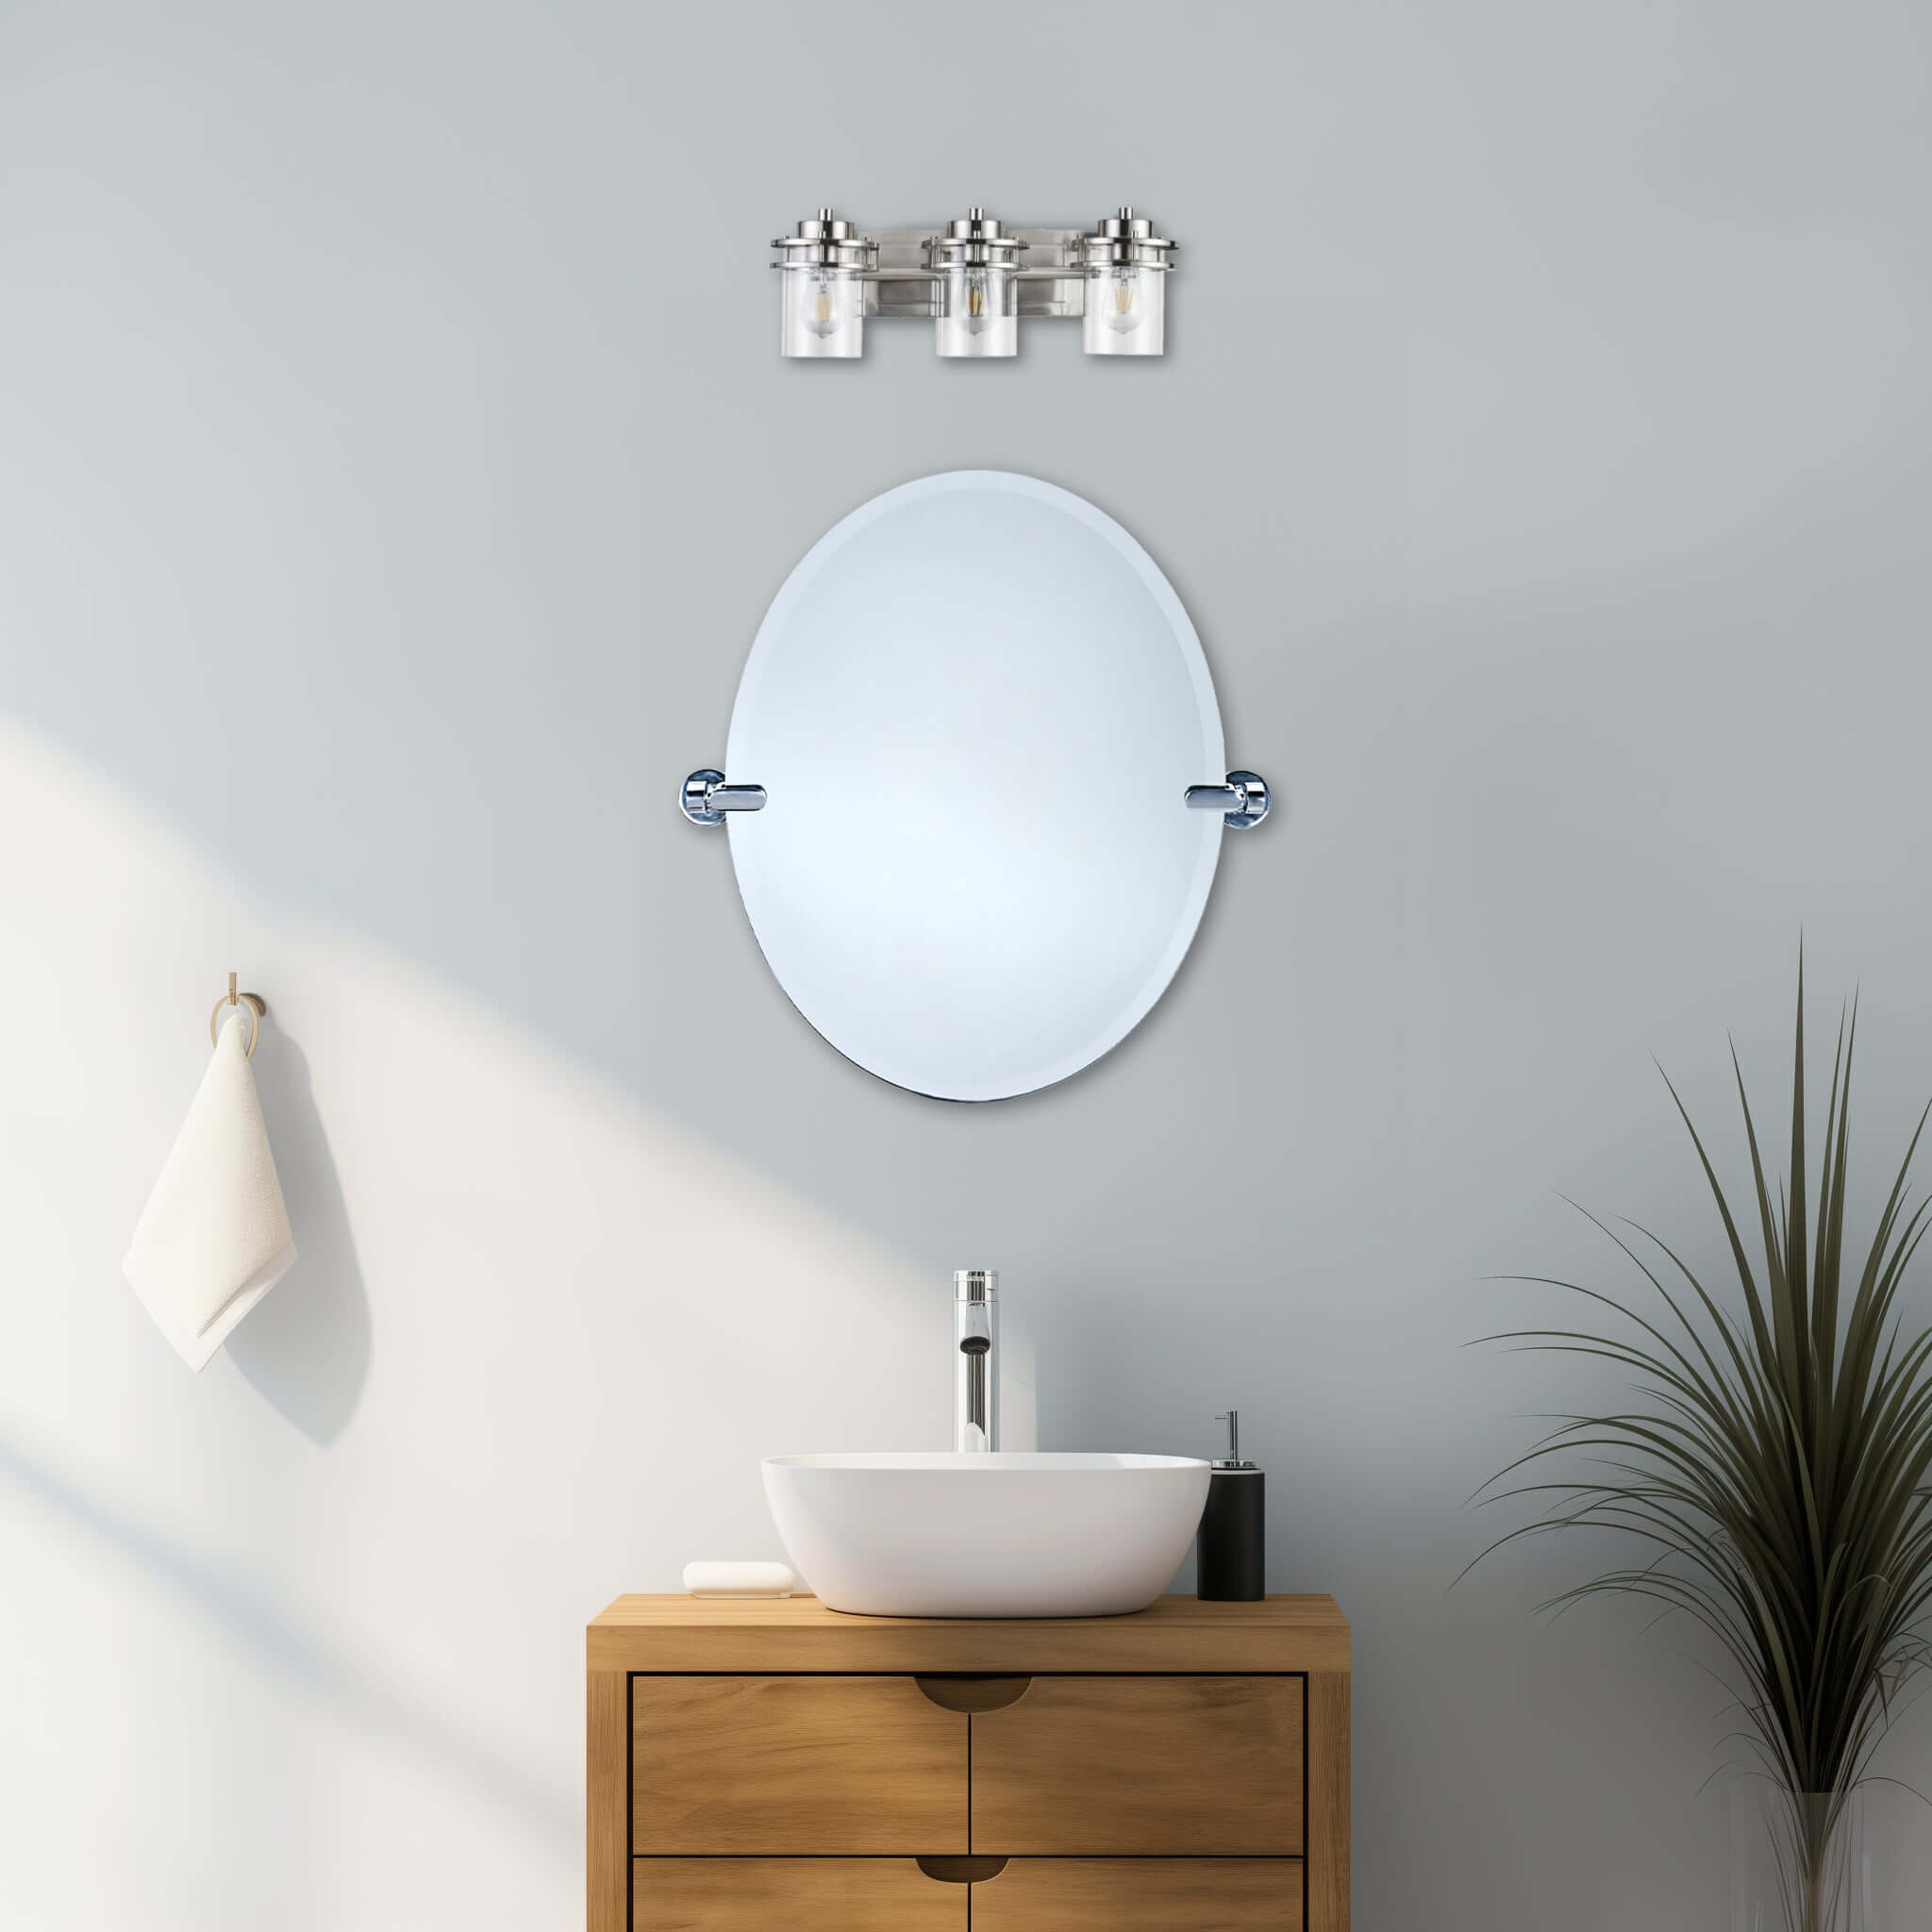 21''W x 24''H Oval Frameless Bathroom Tilting Mirror - Available in 3(Three) Colors - Dreamwerks